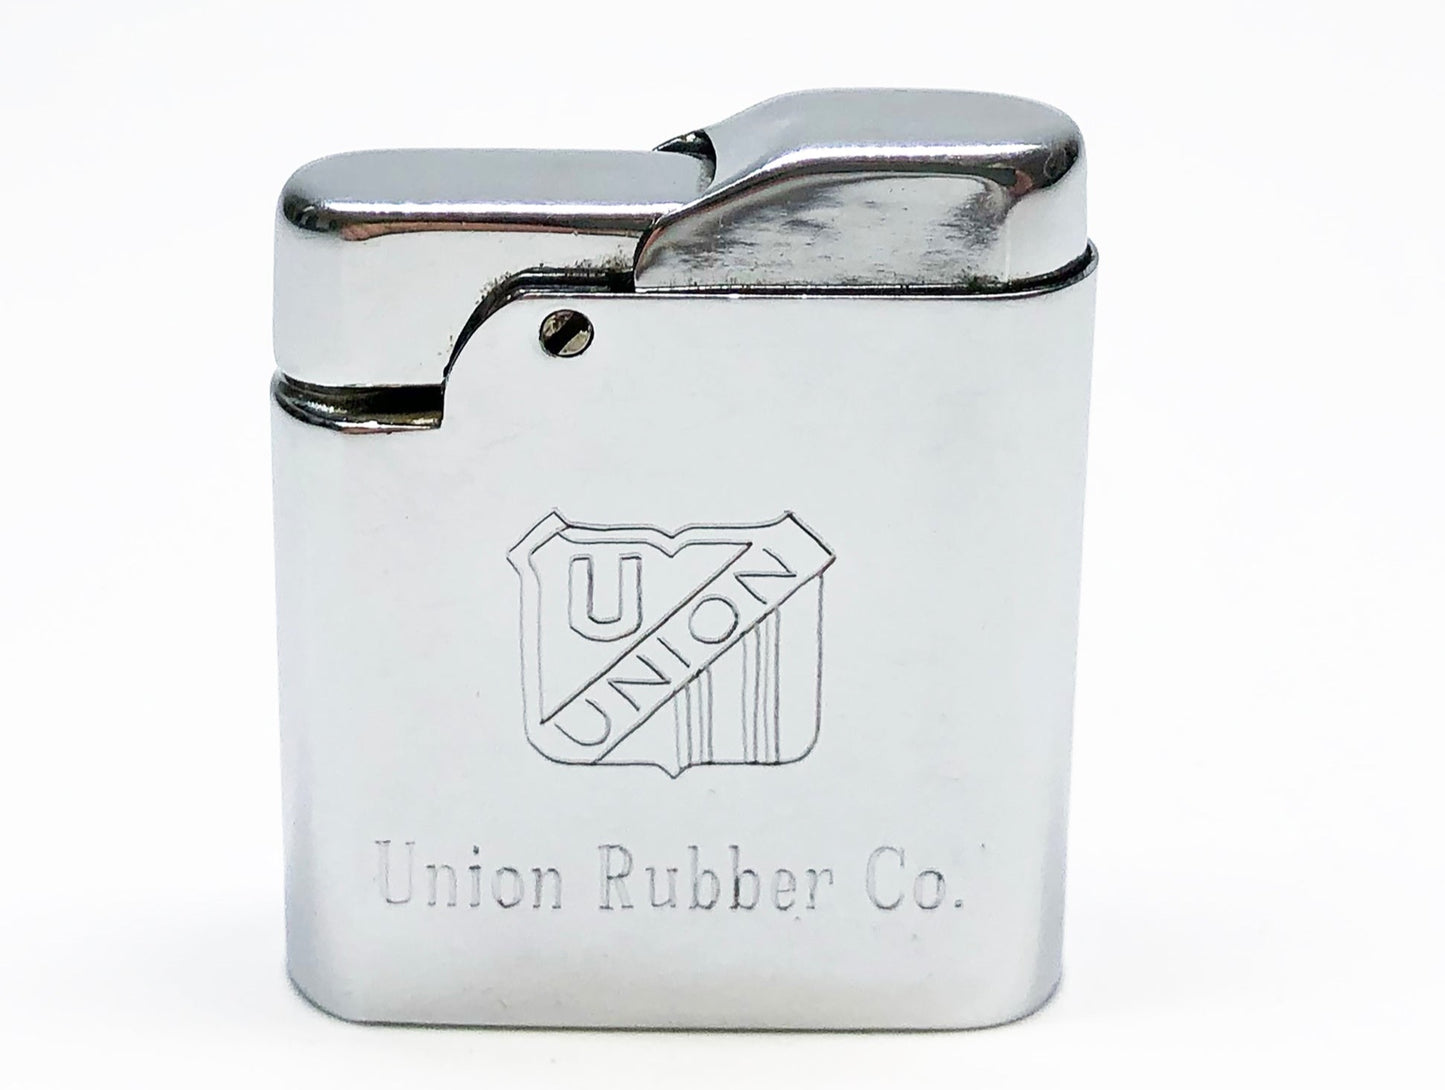 Tigges Snapmatic 1940s Union Rubber Co Advertising Lighter